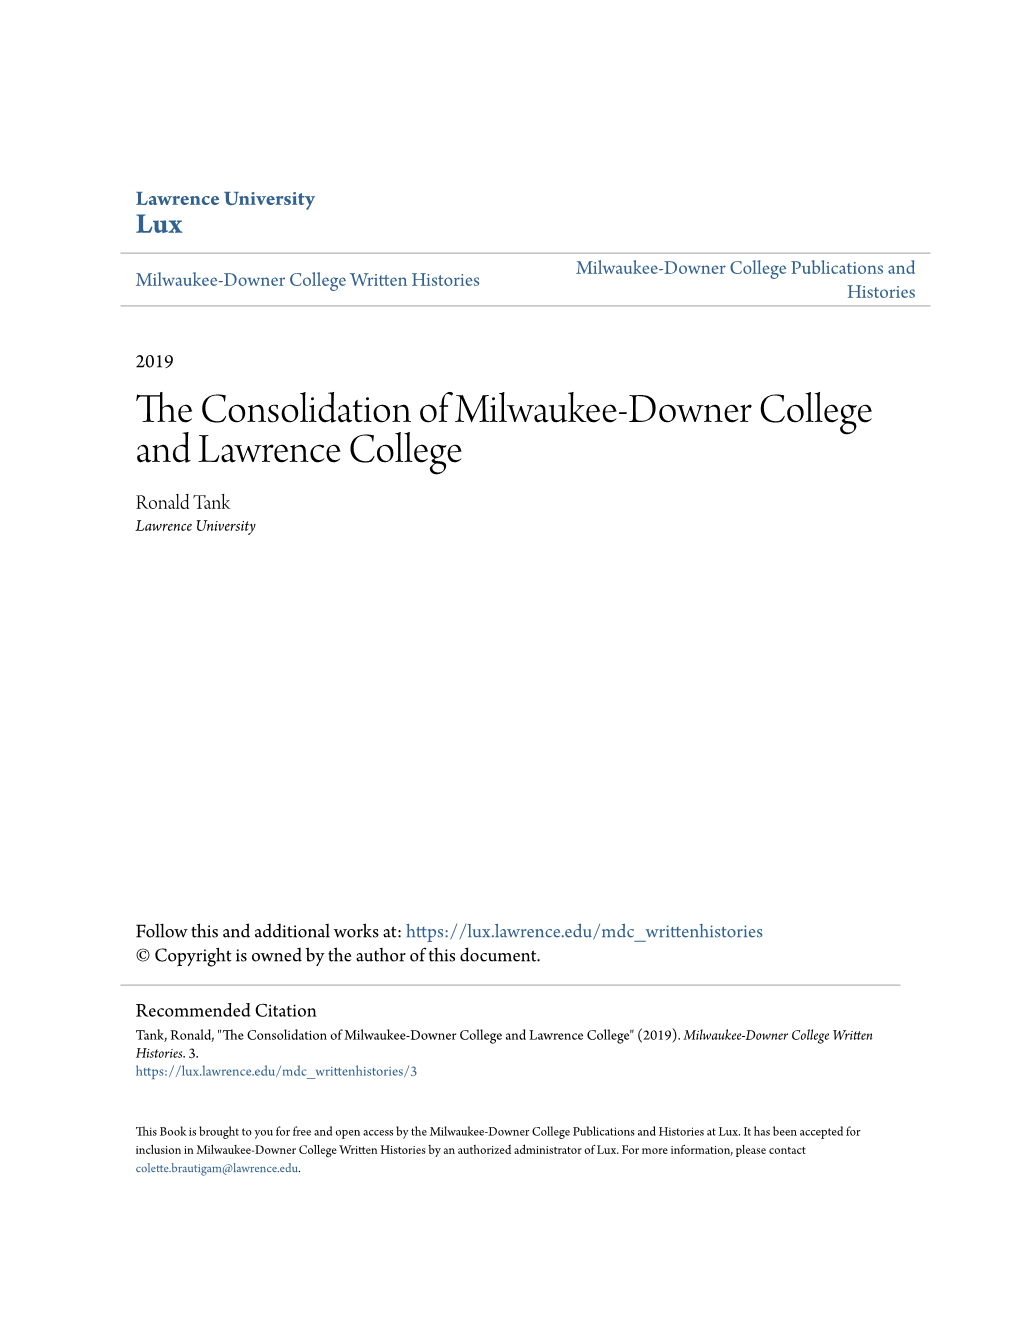 The Consolidation of Milwaukee-Downer College and Lawrence College